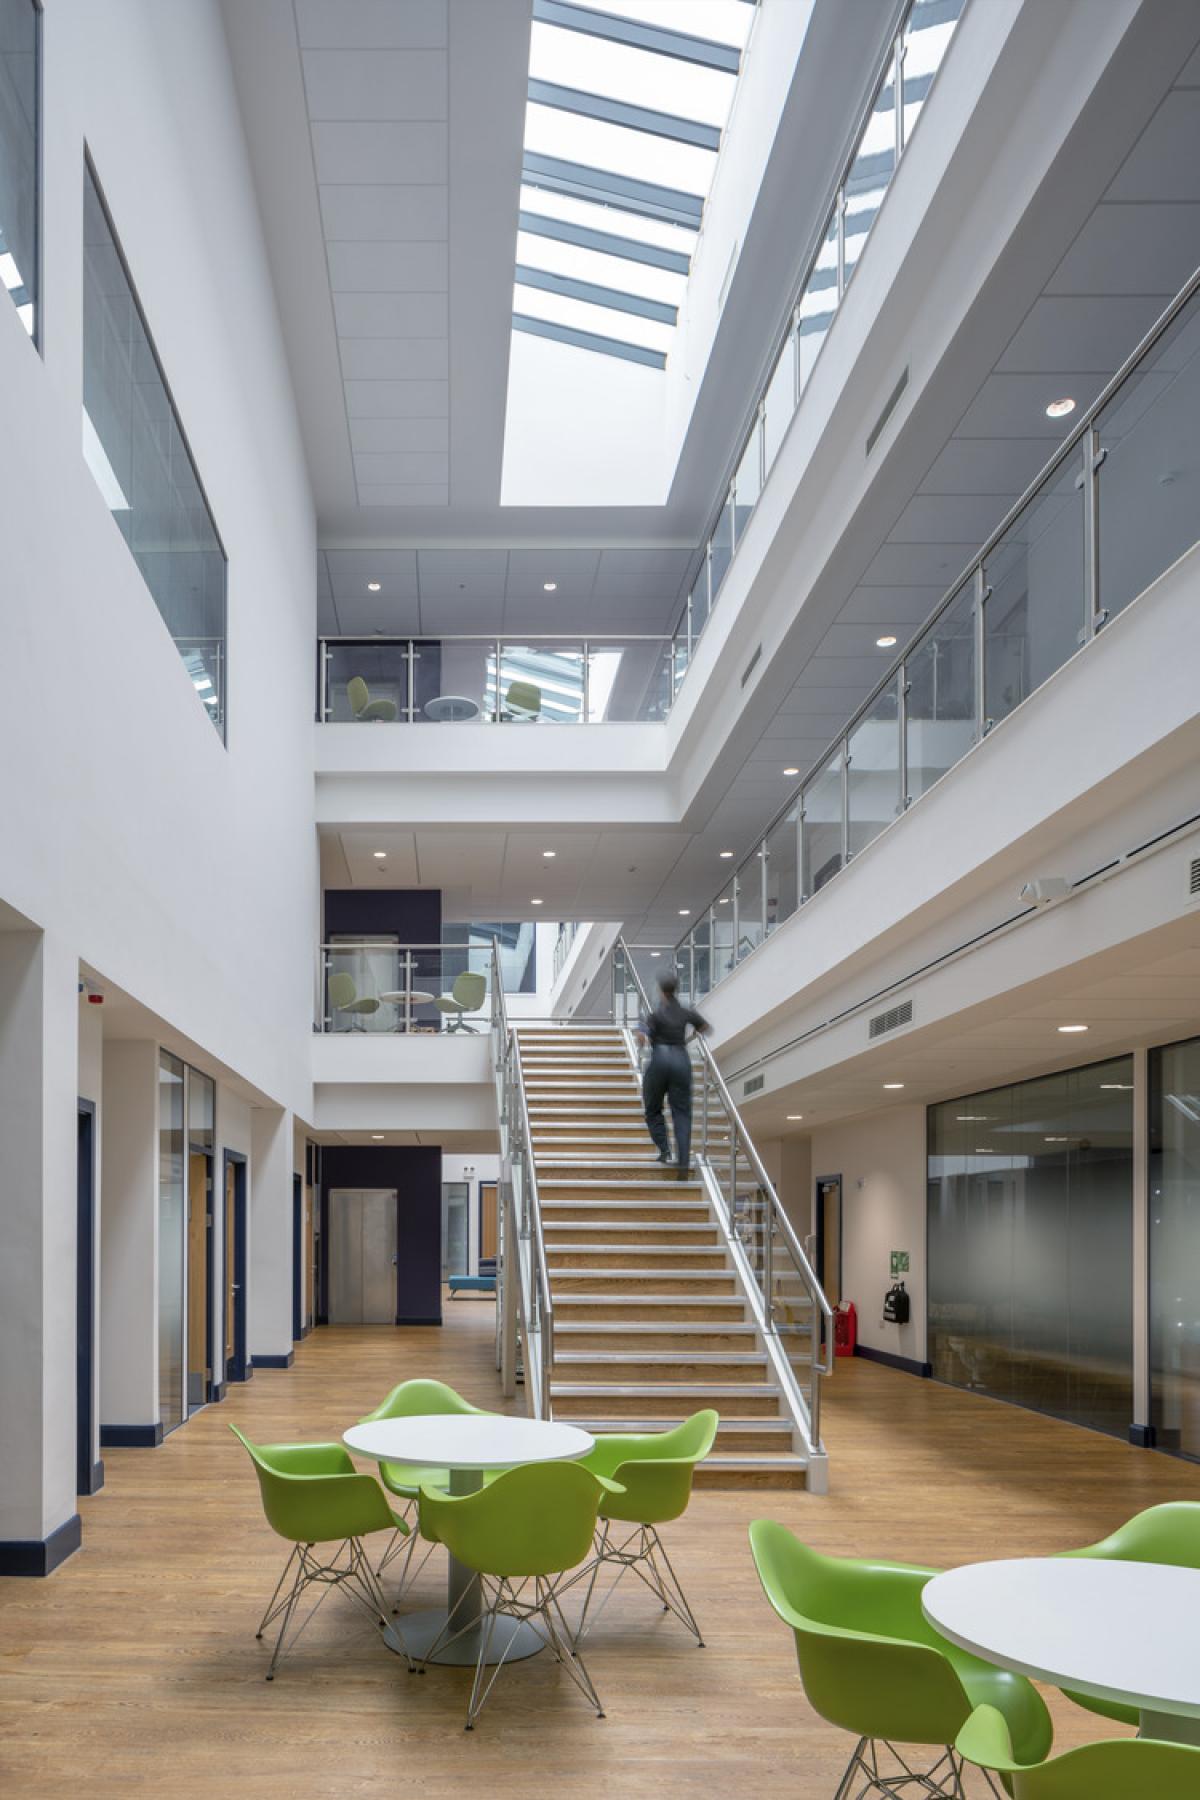 interior of eastern command and custody centre, high ceilings, and large foyer with green seats and white tables